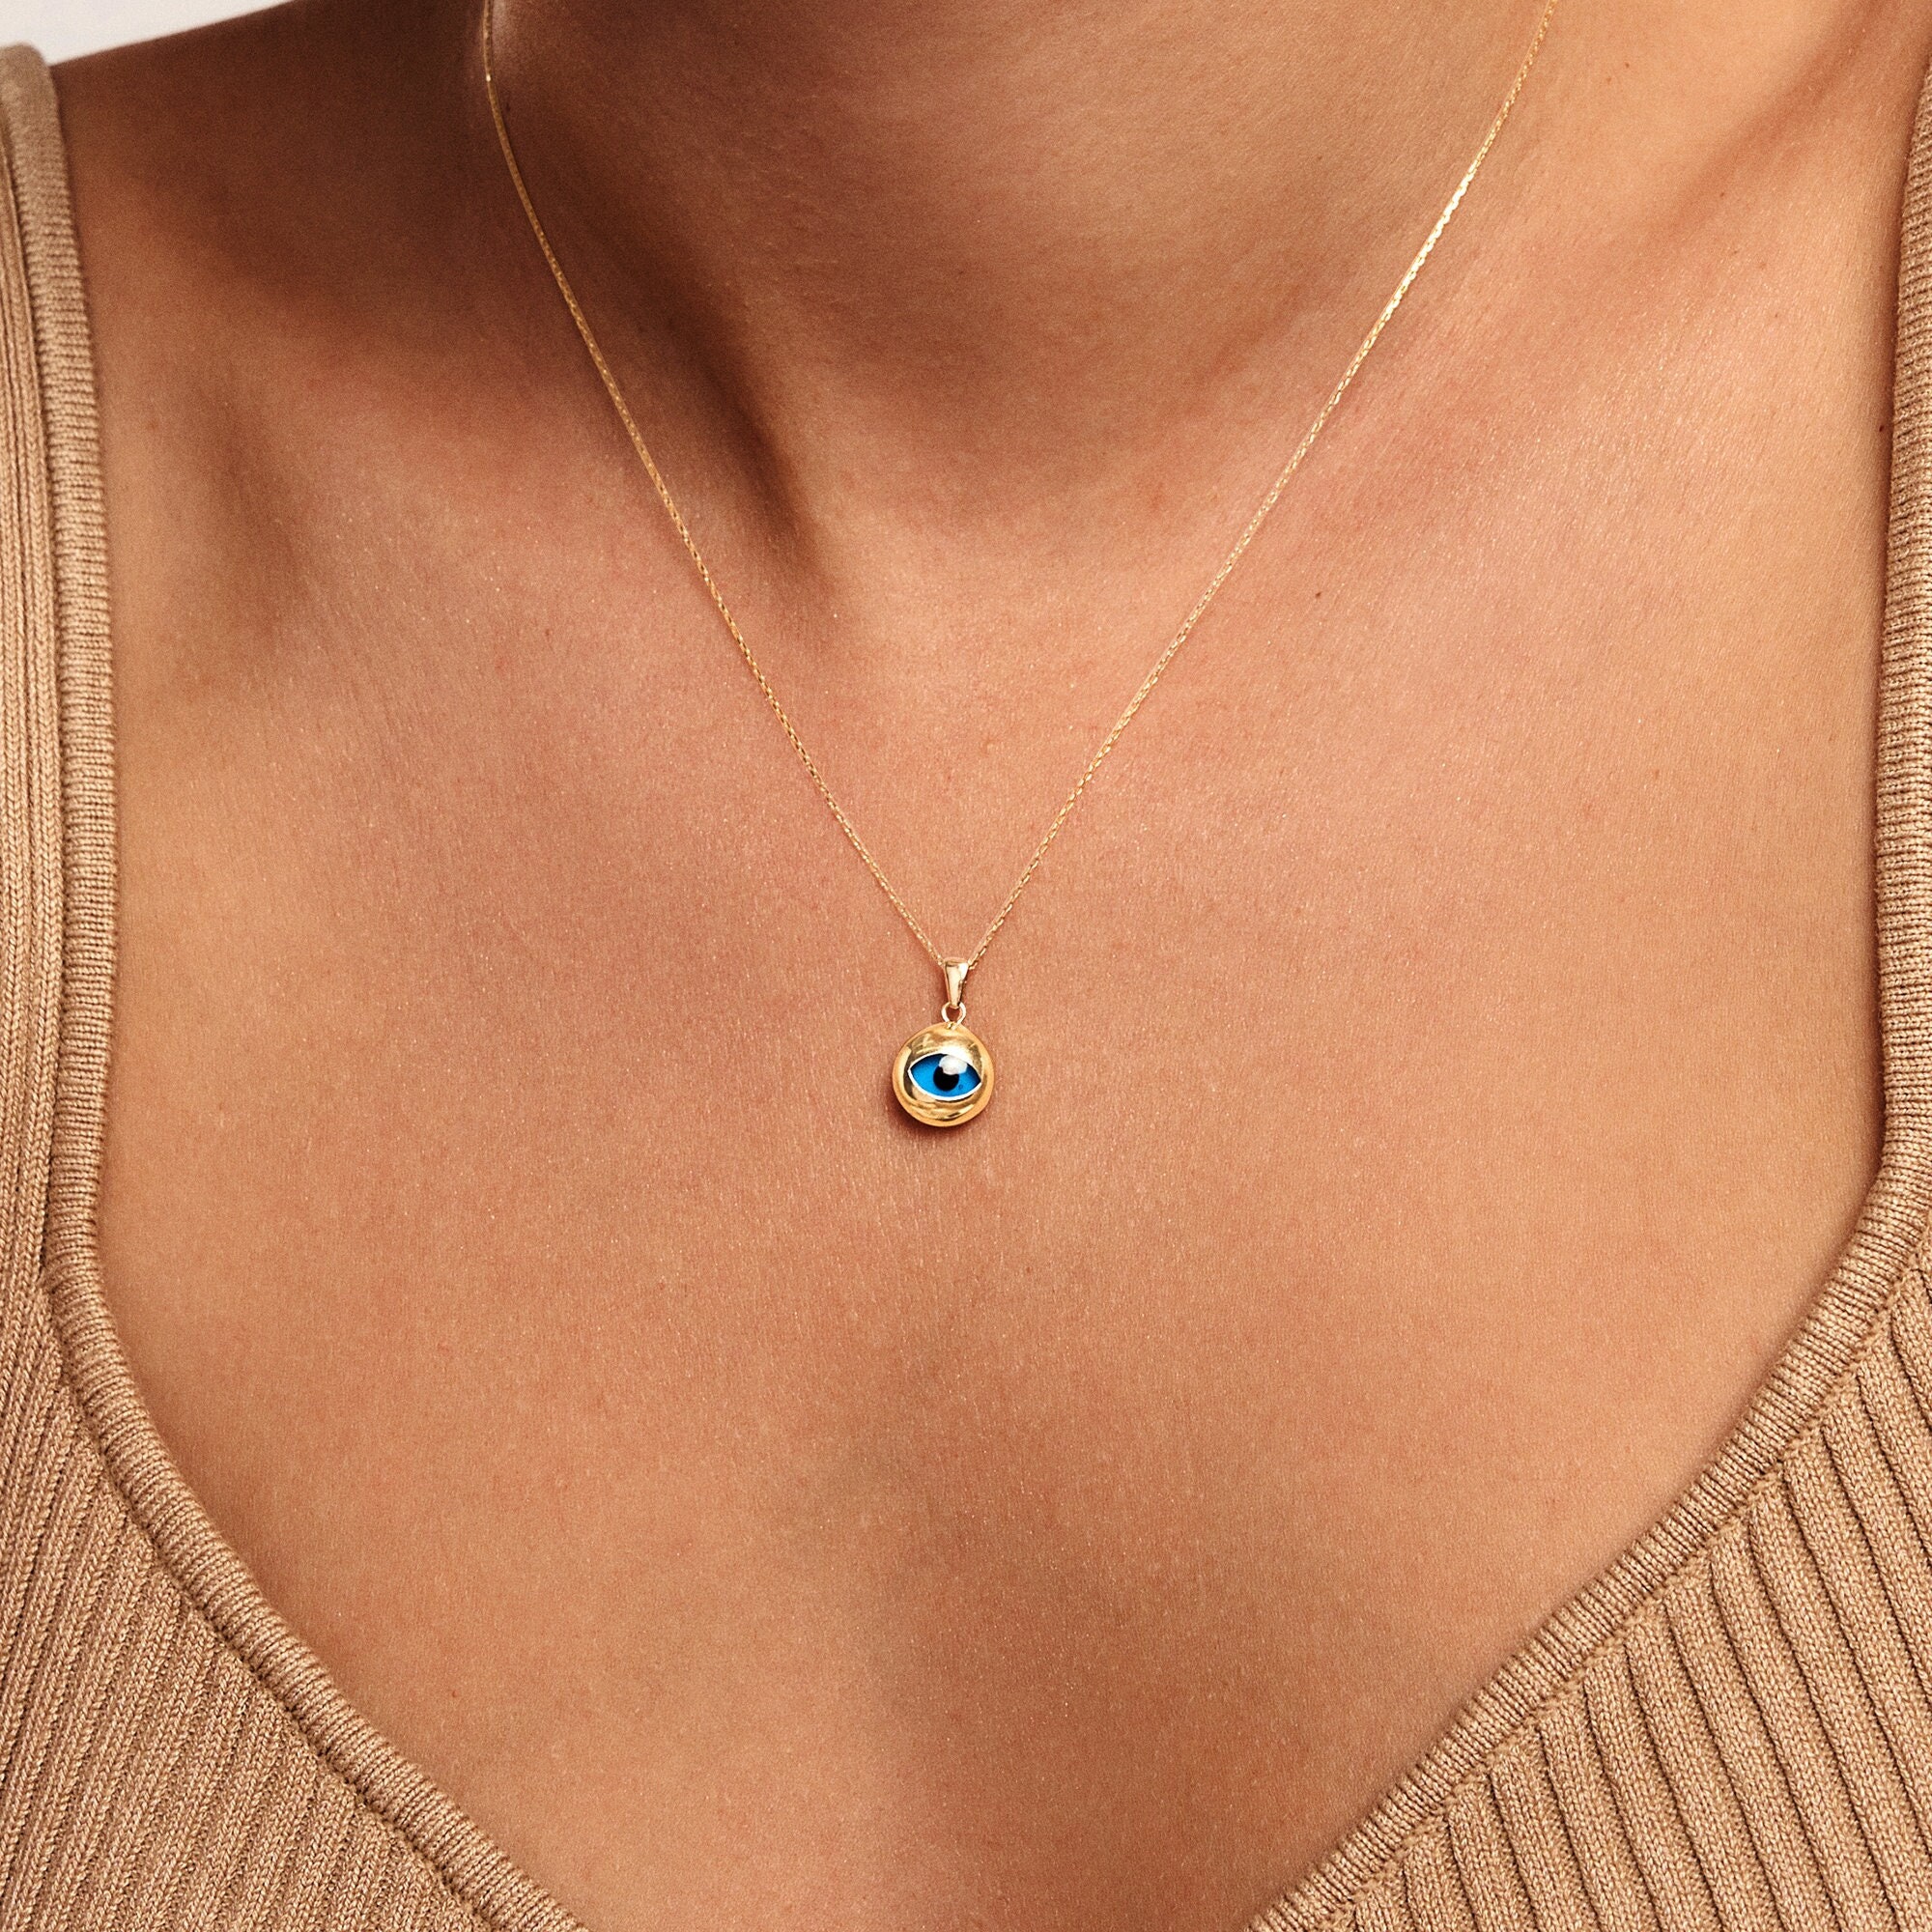 10K YELLOW GOLD Infinity & Blue Evil Eye Necklace with Cubic zirconia  Crystals | eBay